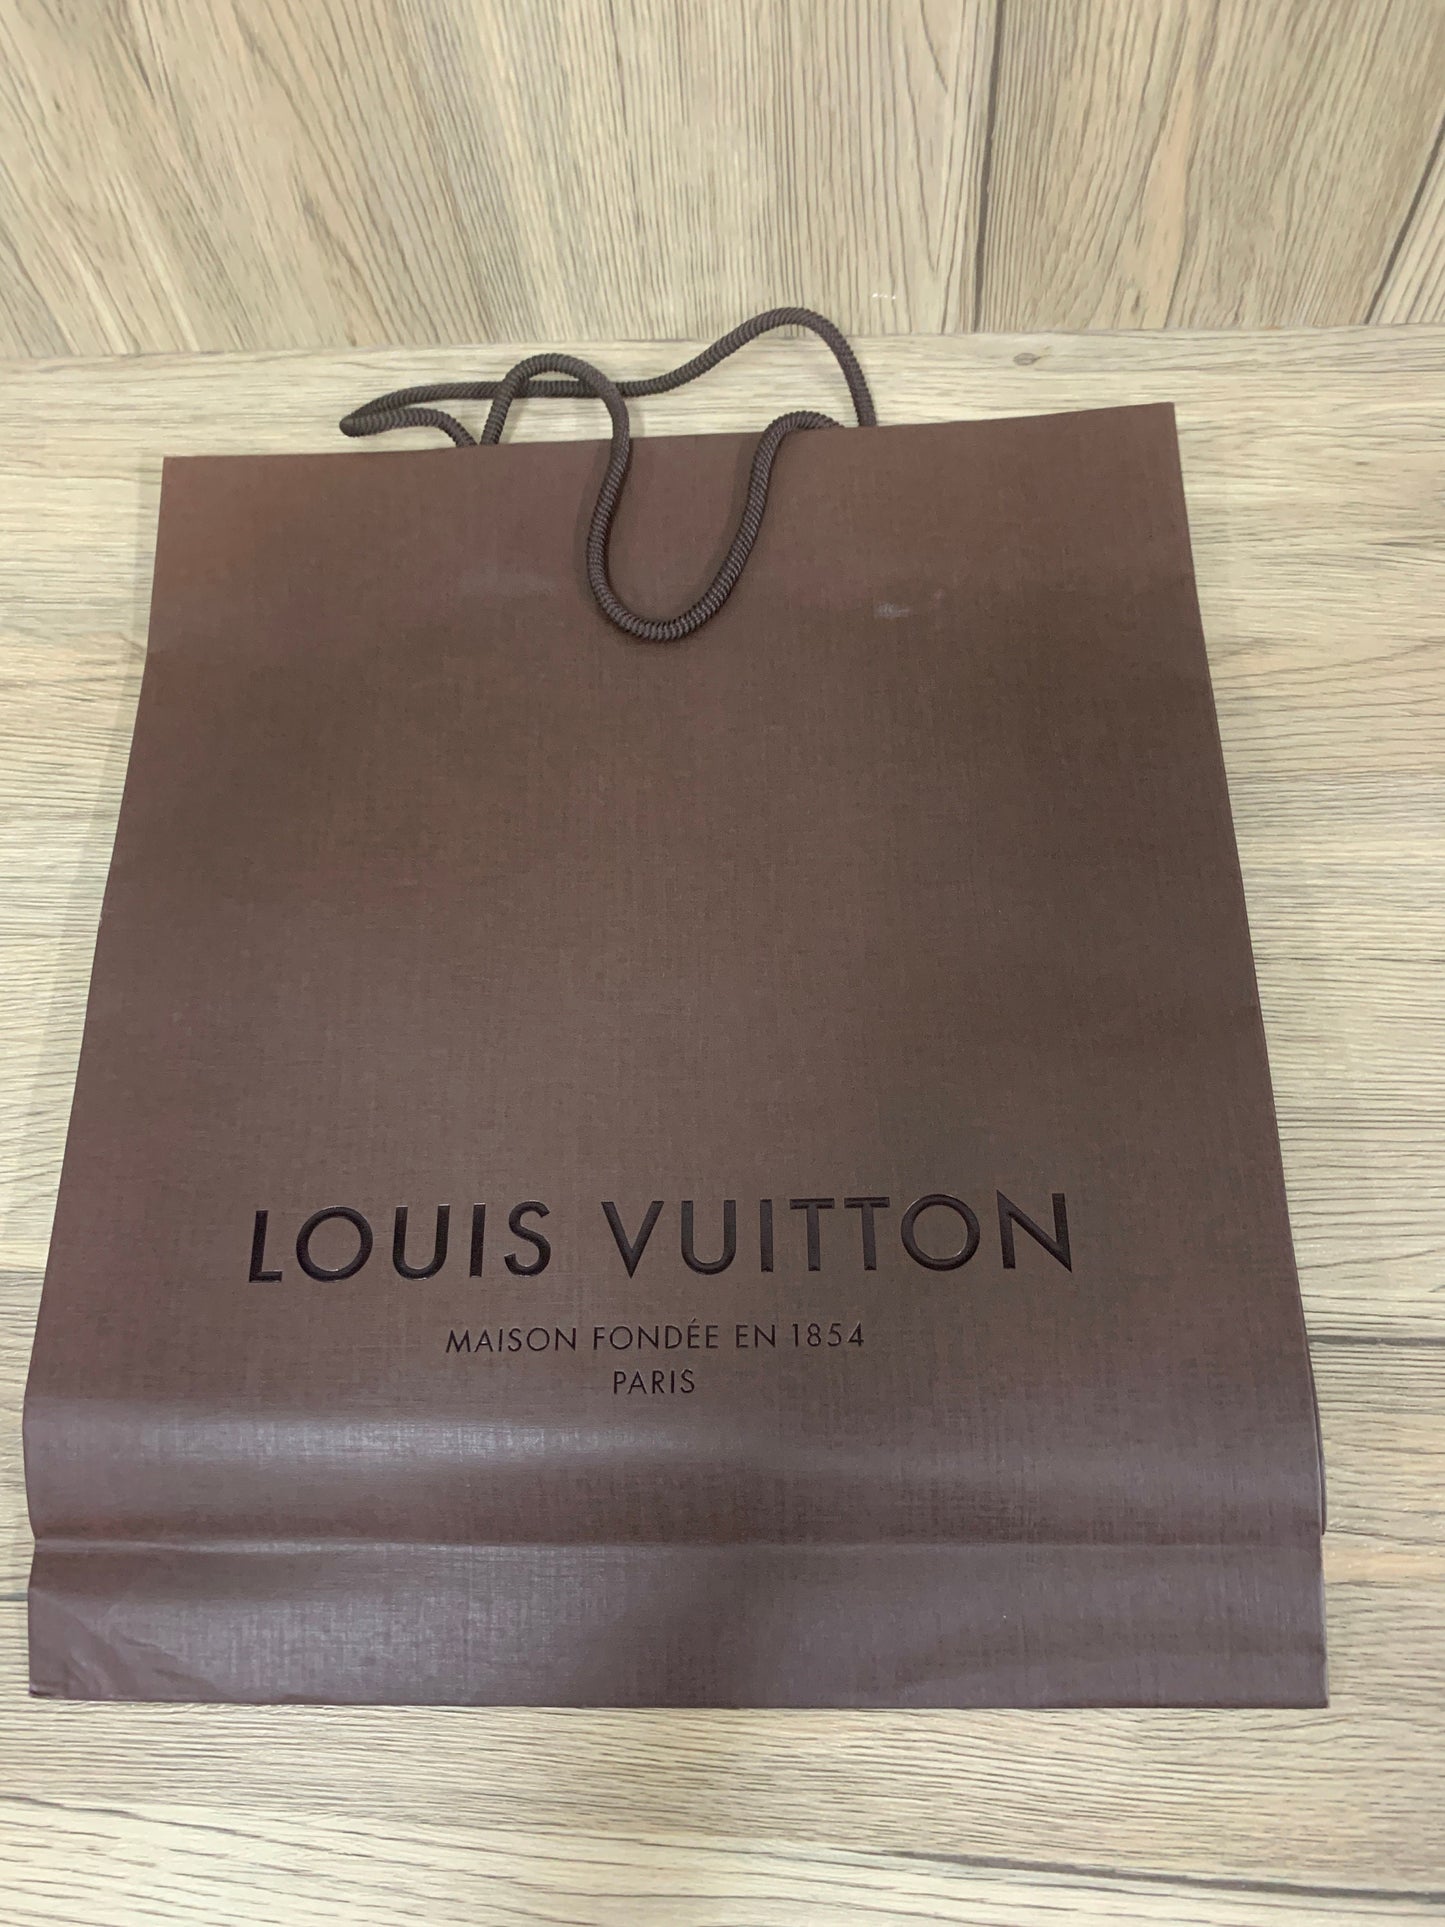 Authentic Louis Vuitton Vintage Paper Box Preowned Good Conditions Large Size handbag and large bag